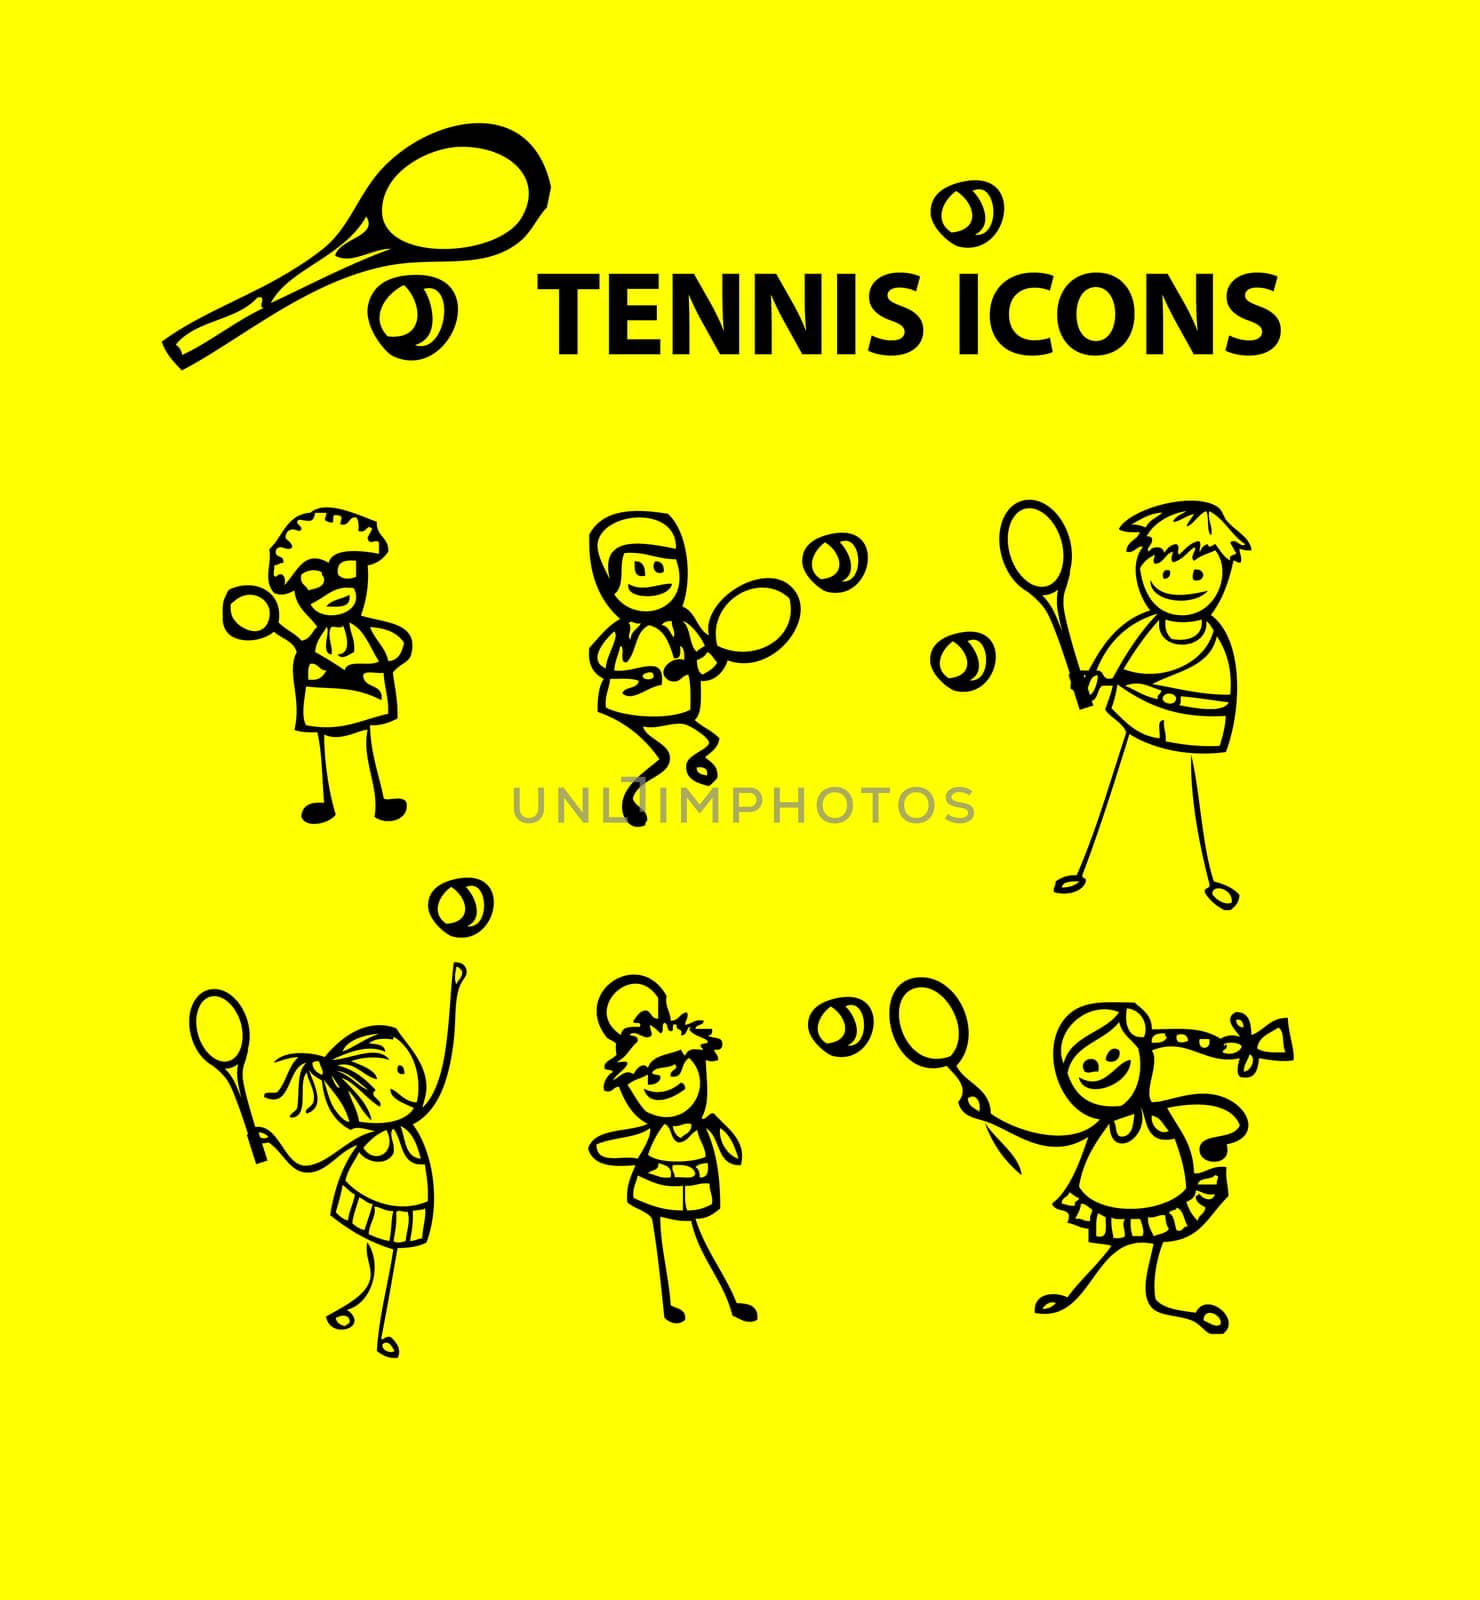 Tennis icons, yellow fake cartoon sport emblems by IconsJewelry